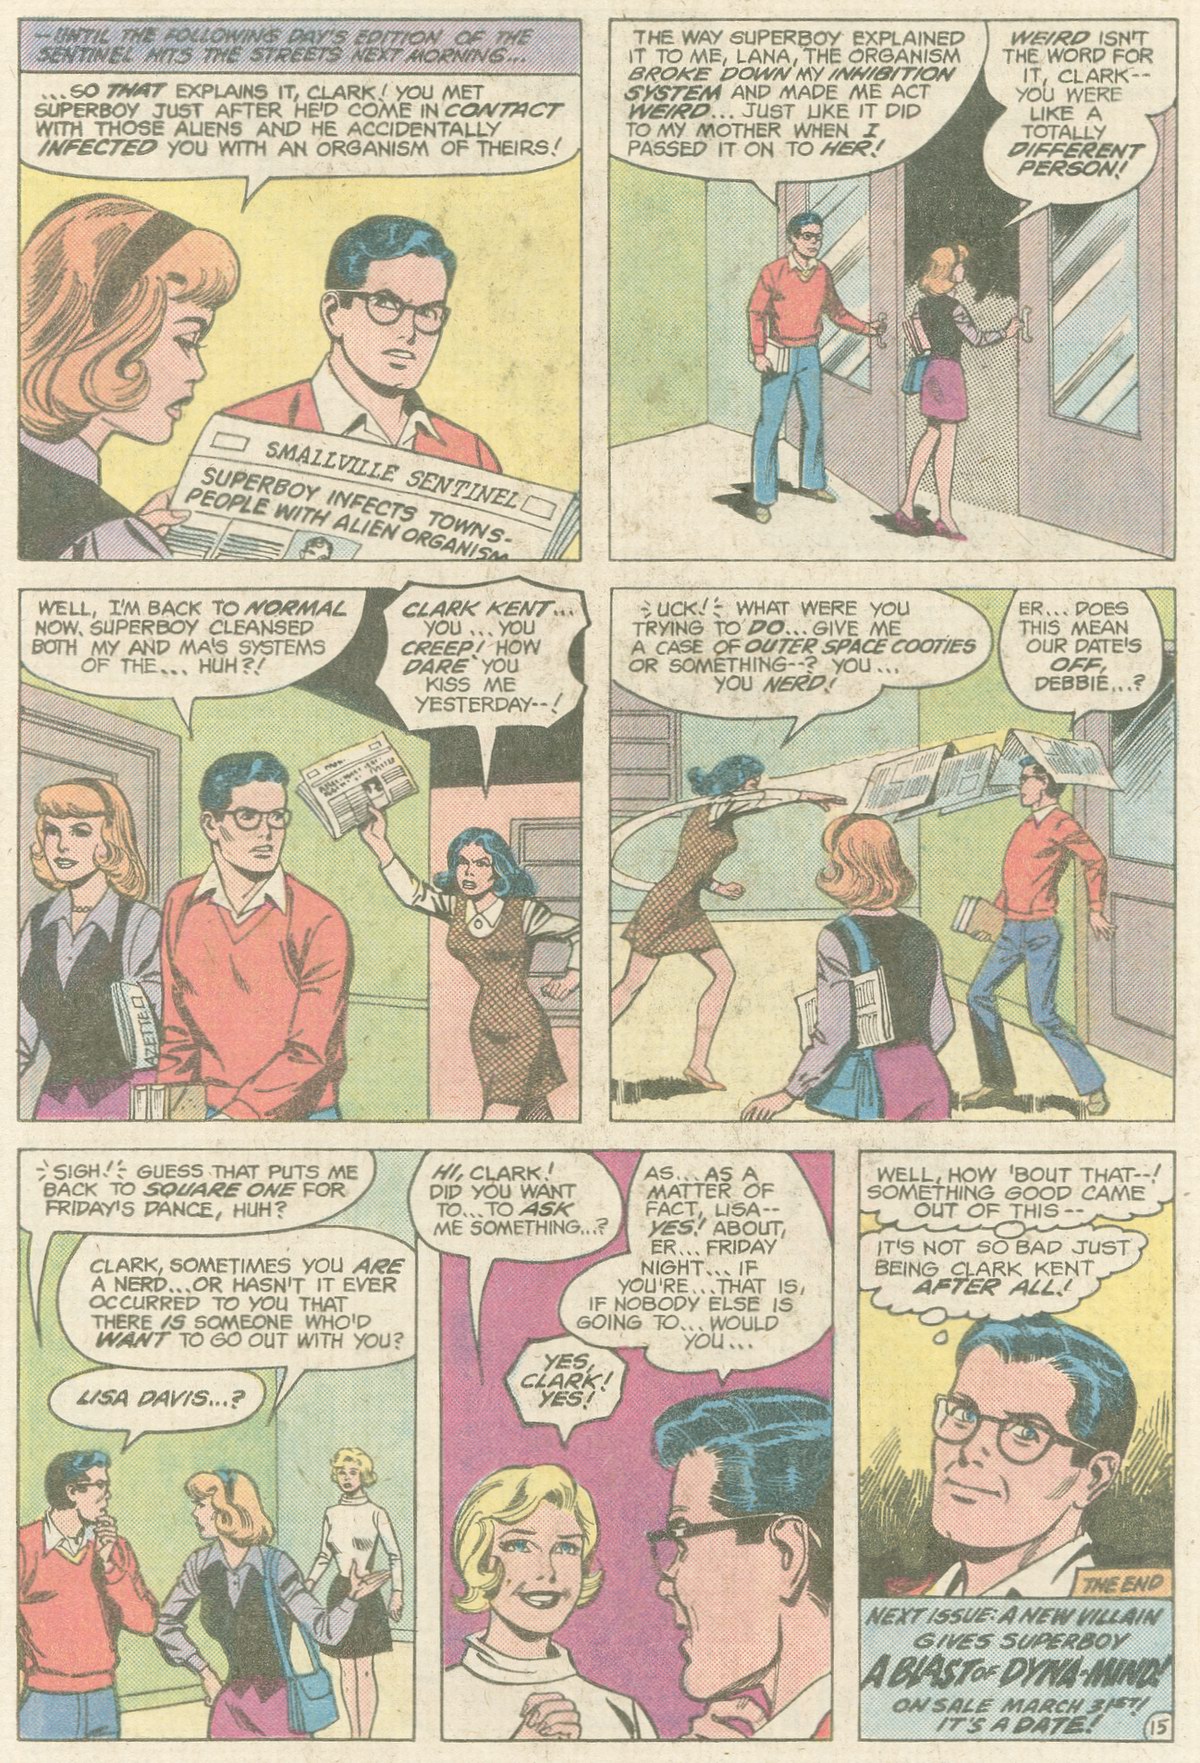 The New Adventures of Superboy 41 Page 15